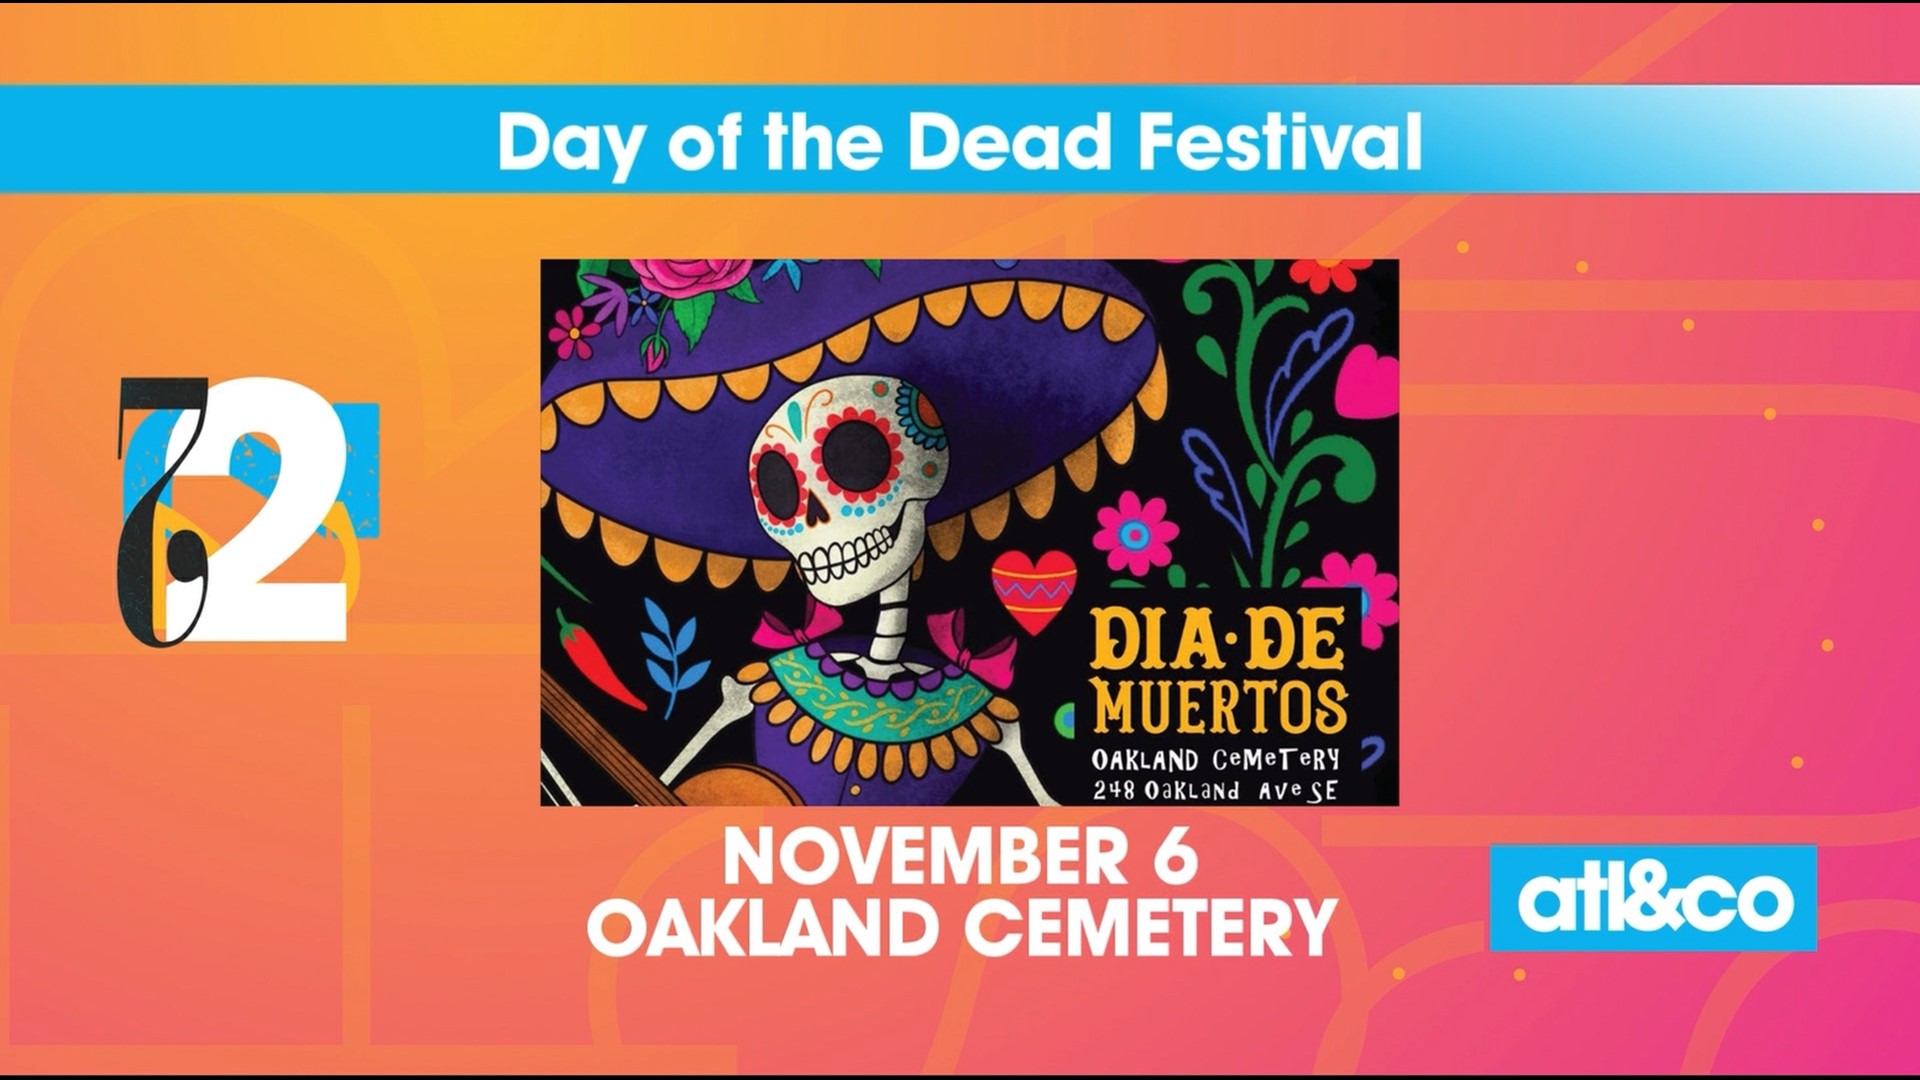 From Chomp & Stomp in Cabbagetown to Day of the Dead at Oakland Cemetery, get your top weekend events on A&C.